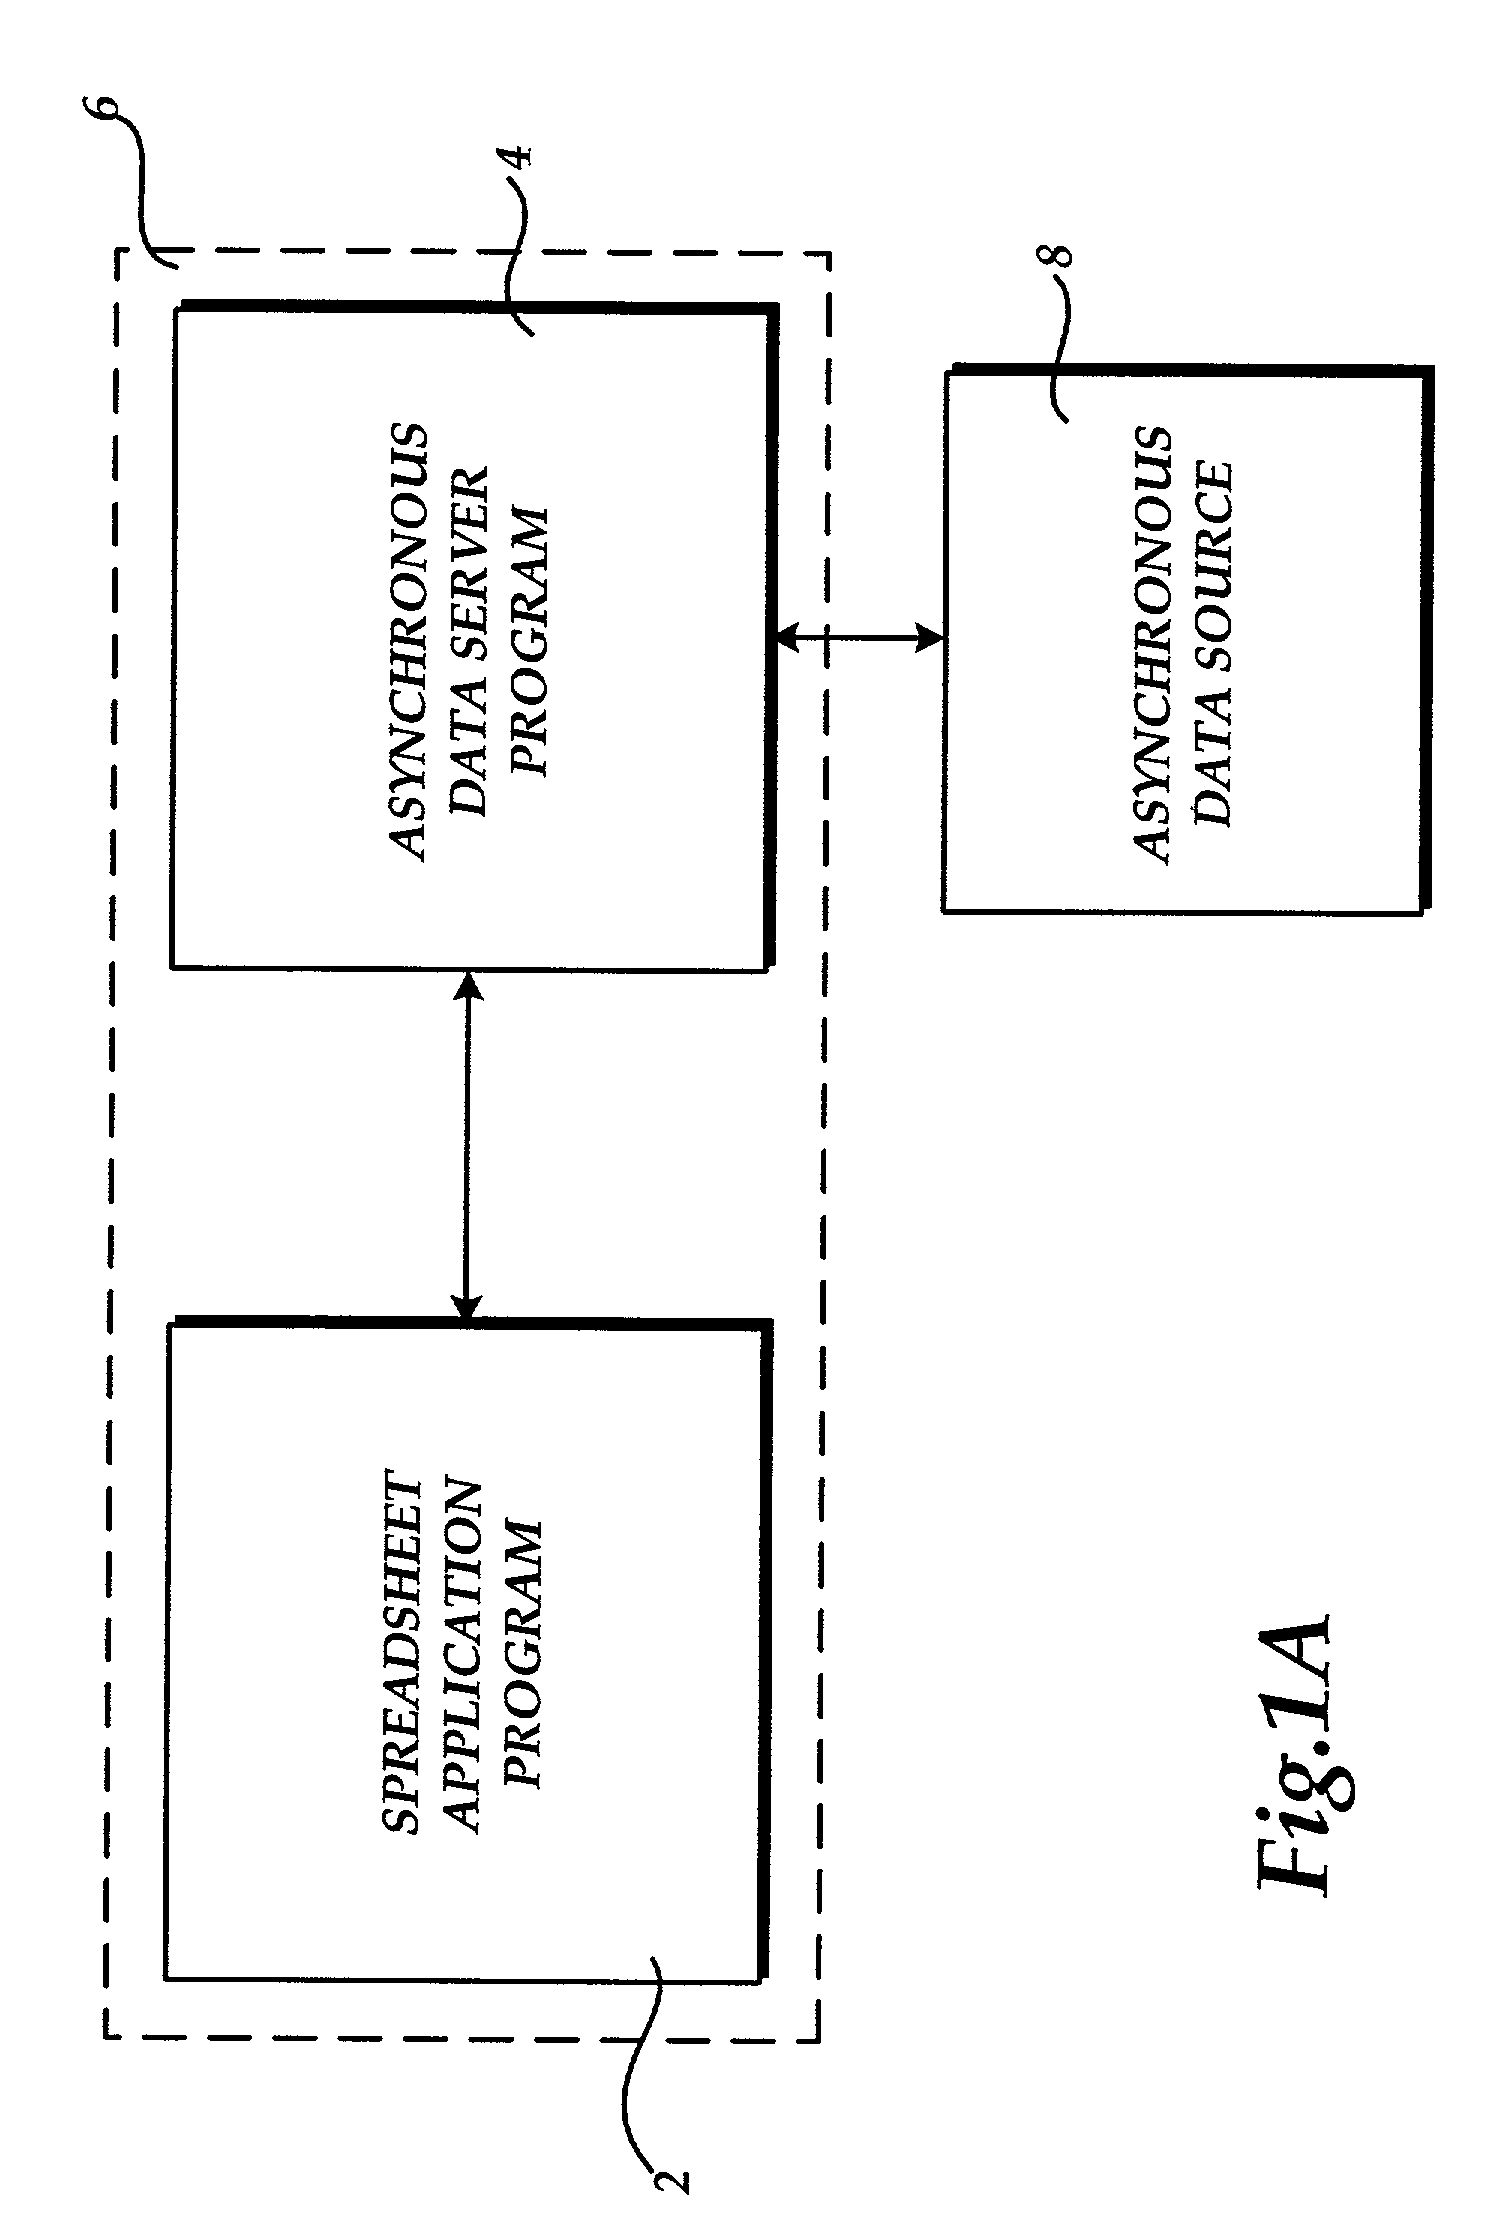 Method, system, and apparatus for providing access to asynchronous data in a spreadsheet application program